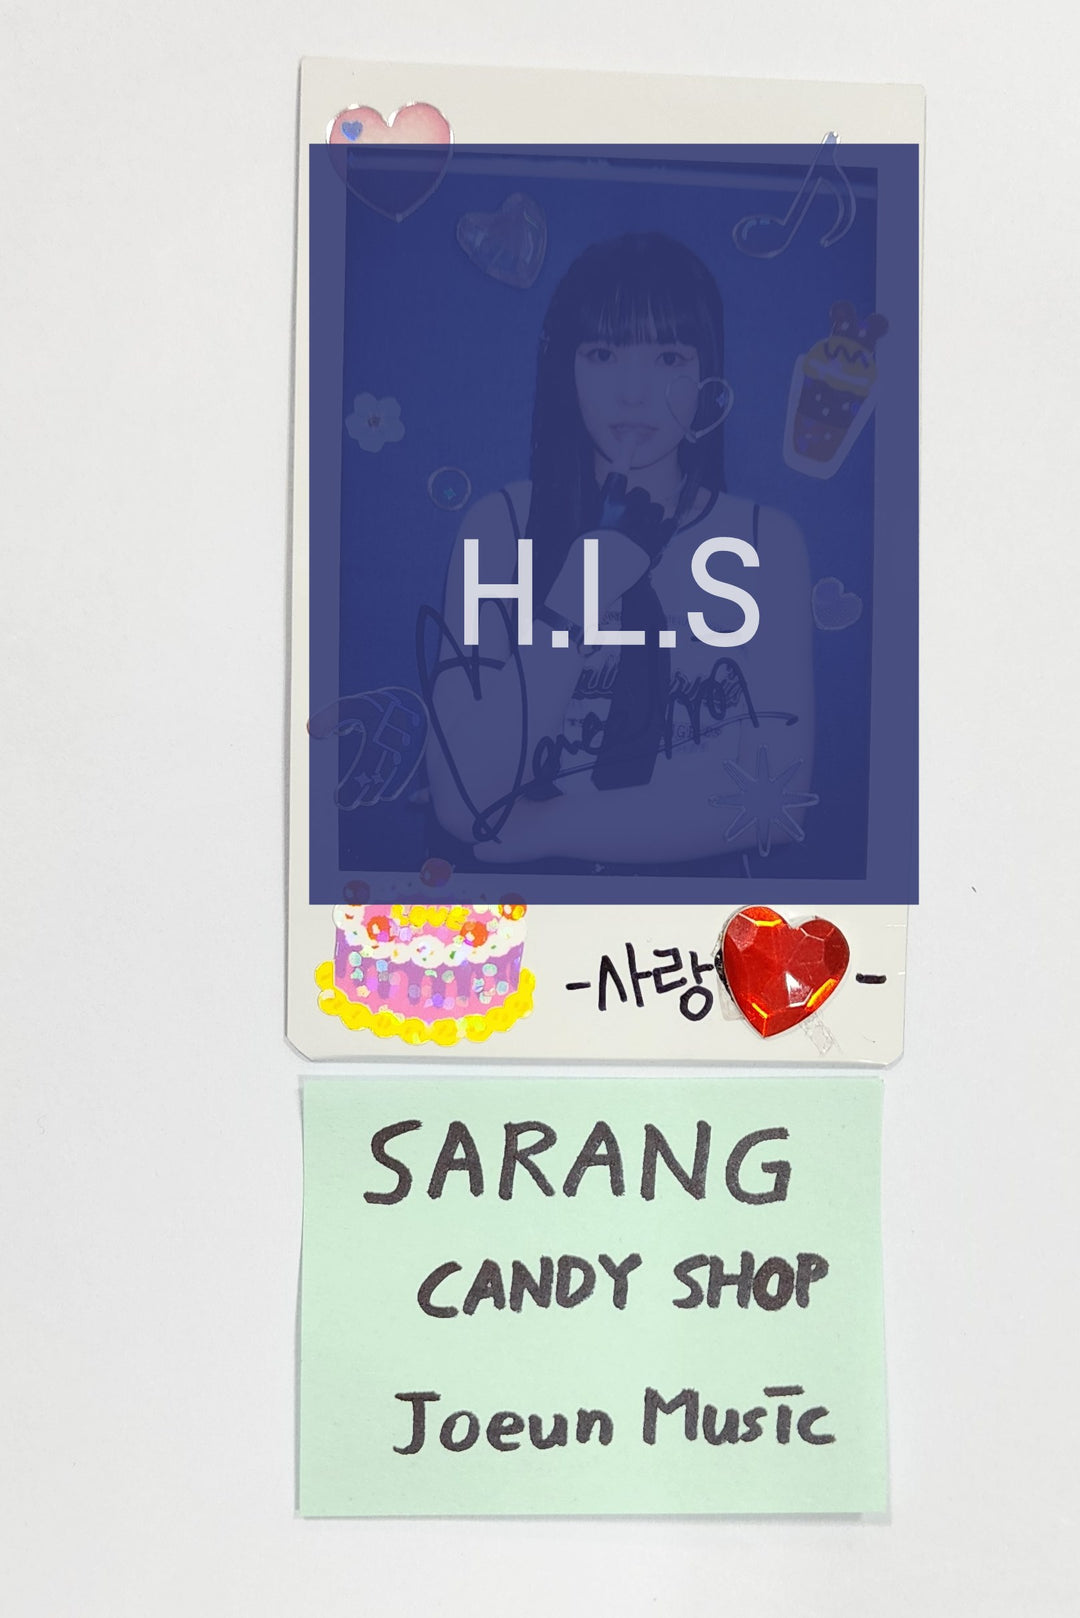 SARANG (Of Candy Shop) "Hashtag#" - Hand Autographed(Signed) Polaroid [24.4.19]